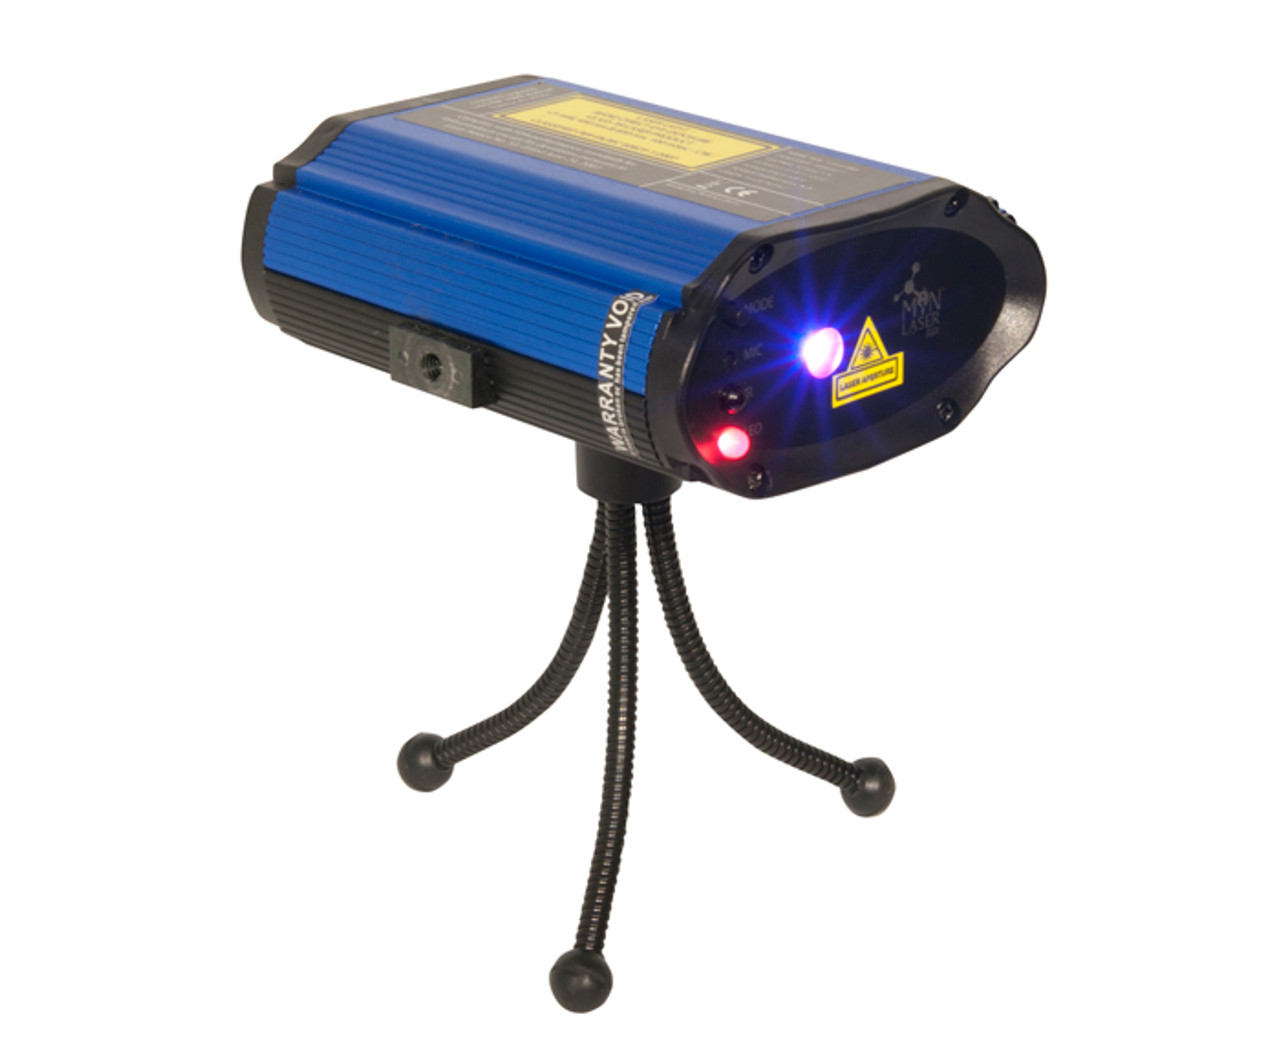 MiN Laser light RBX for nightclubs and bars